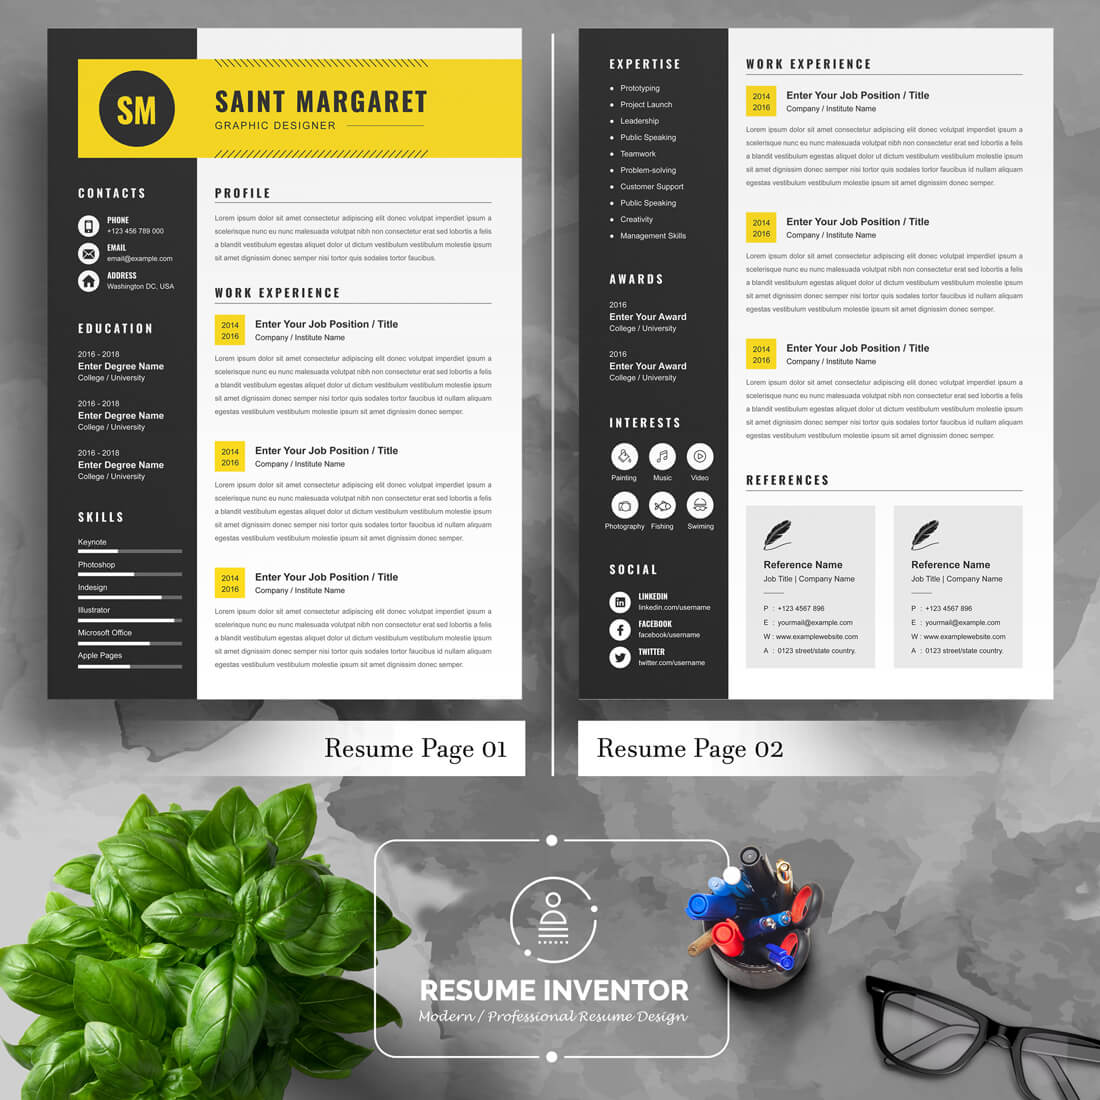 Two pages of the Graphic Designer Resume Template.